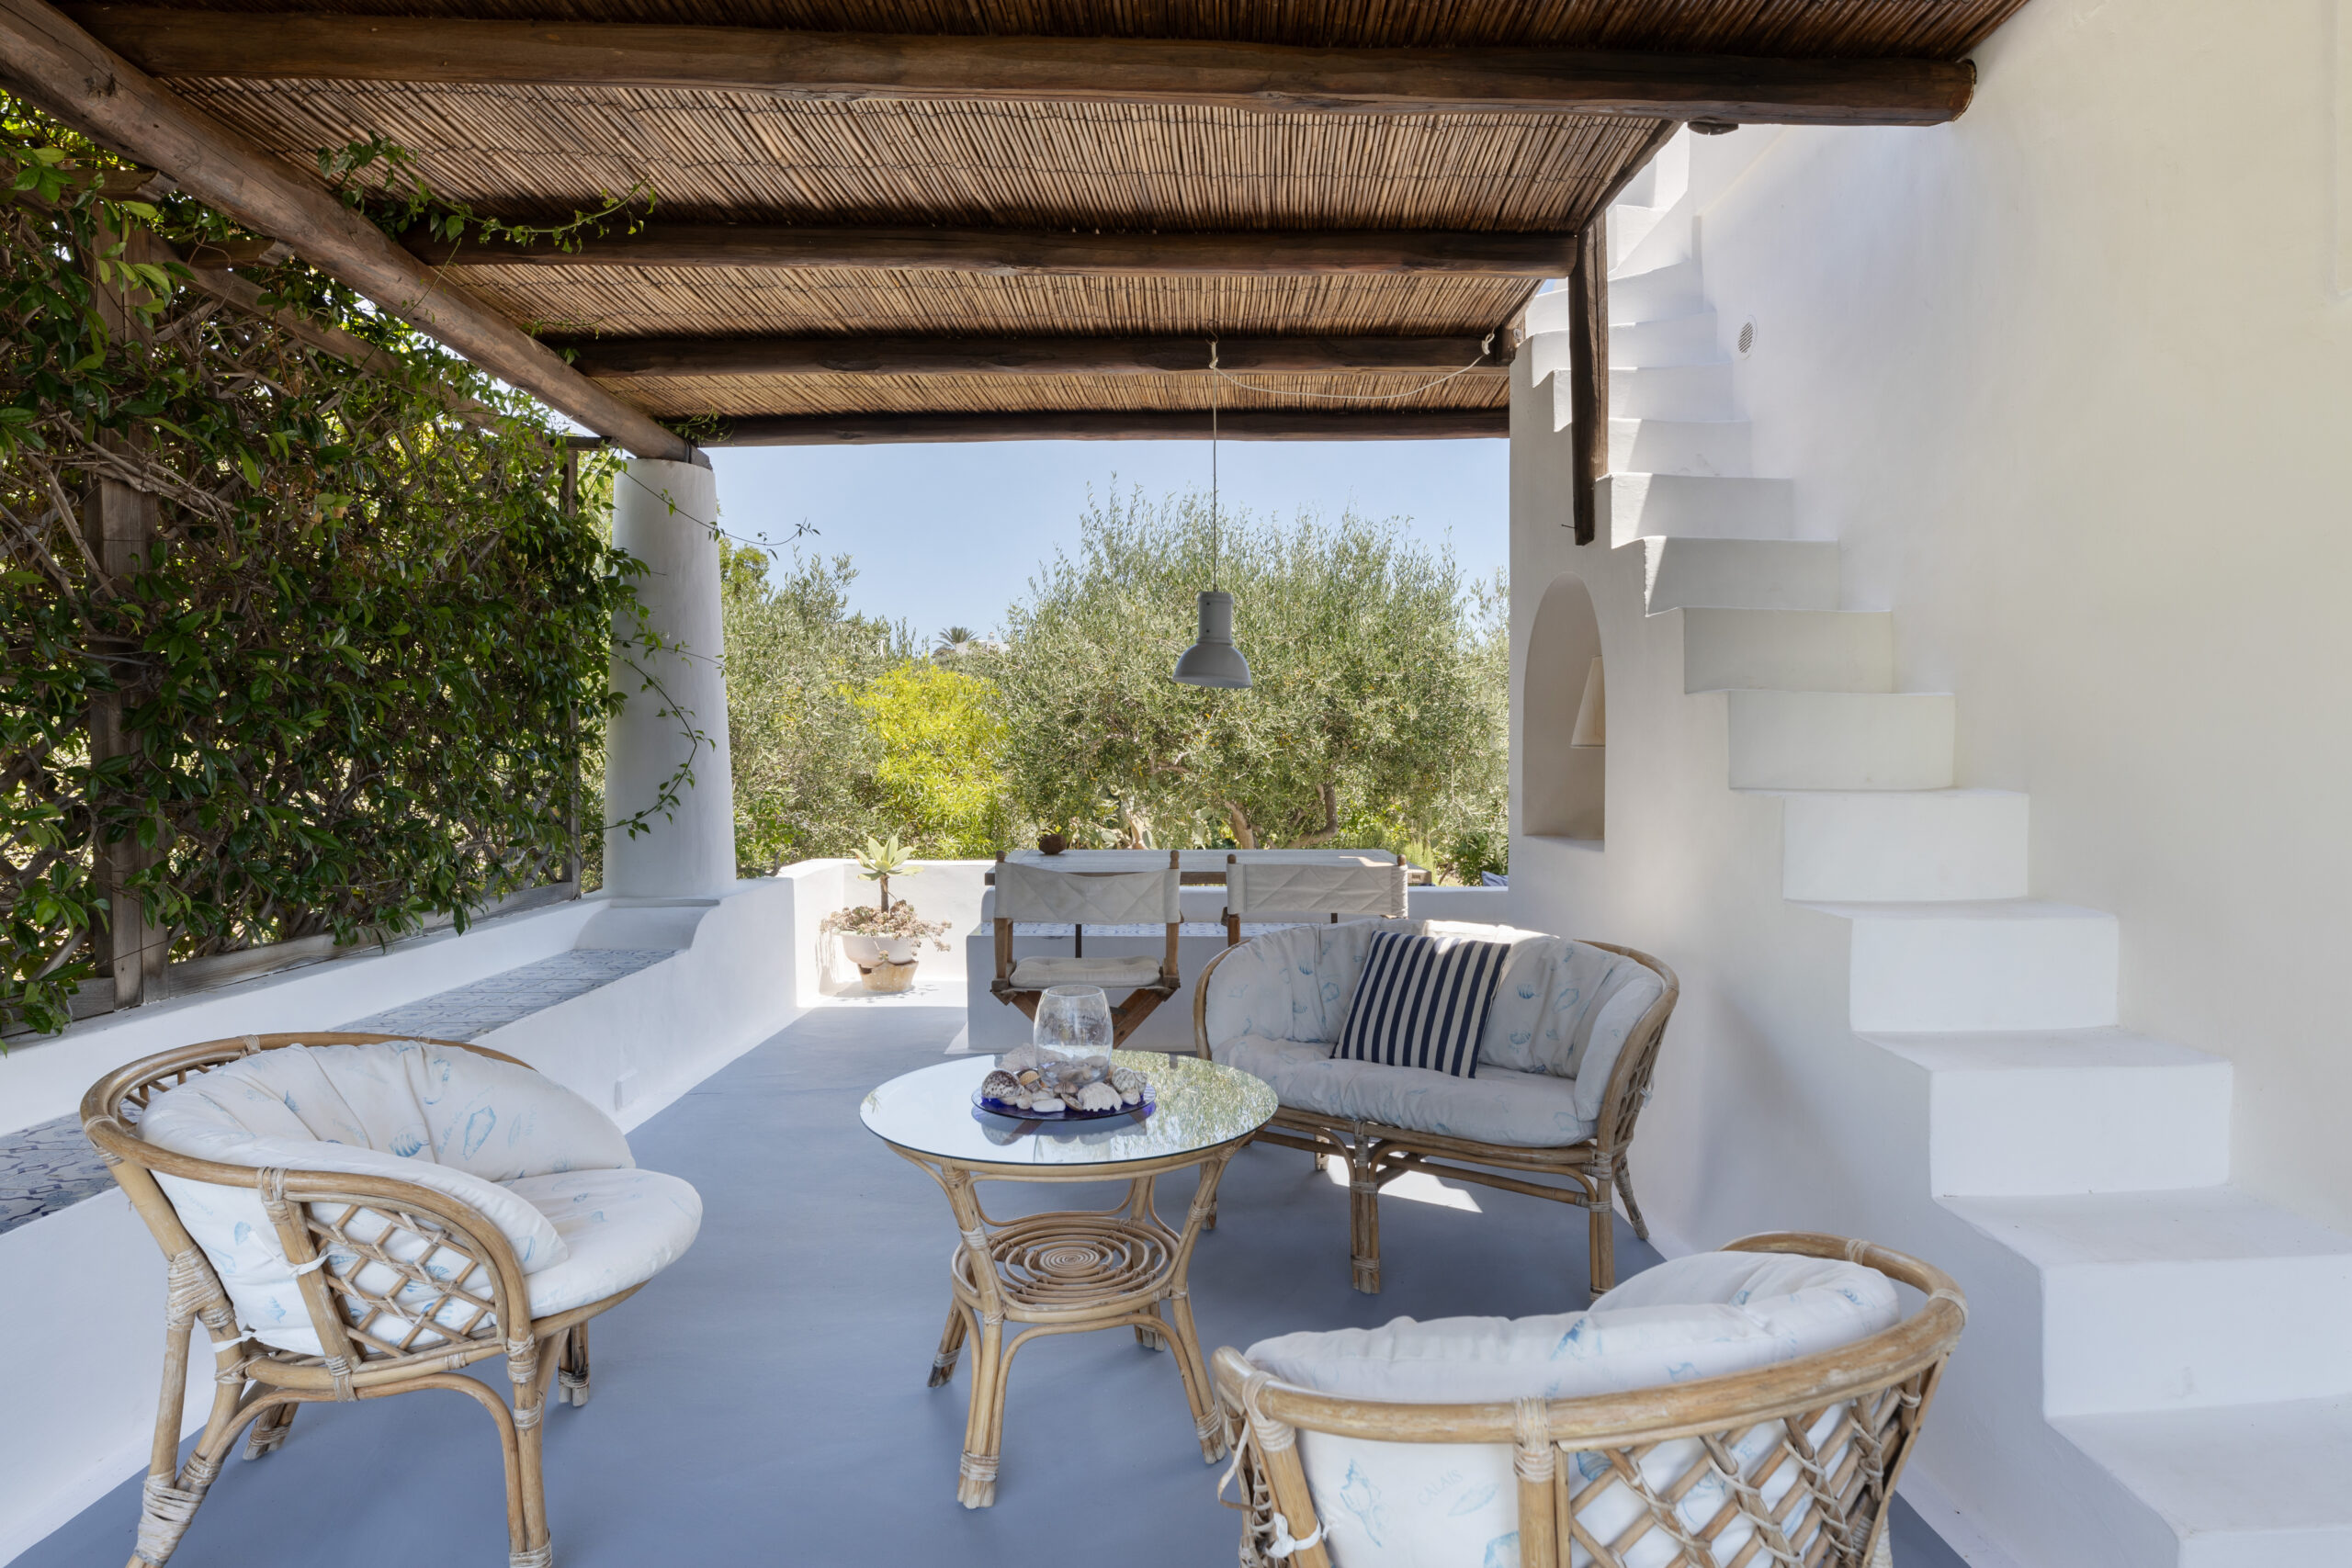 A shaded outdoor sitting area next to a white marble staircase and house